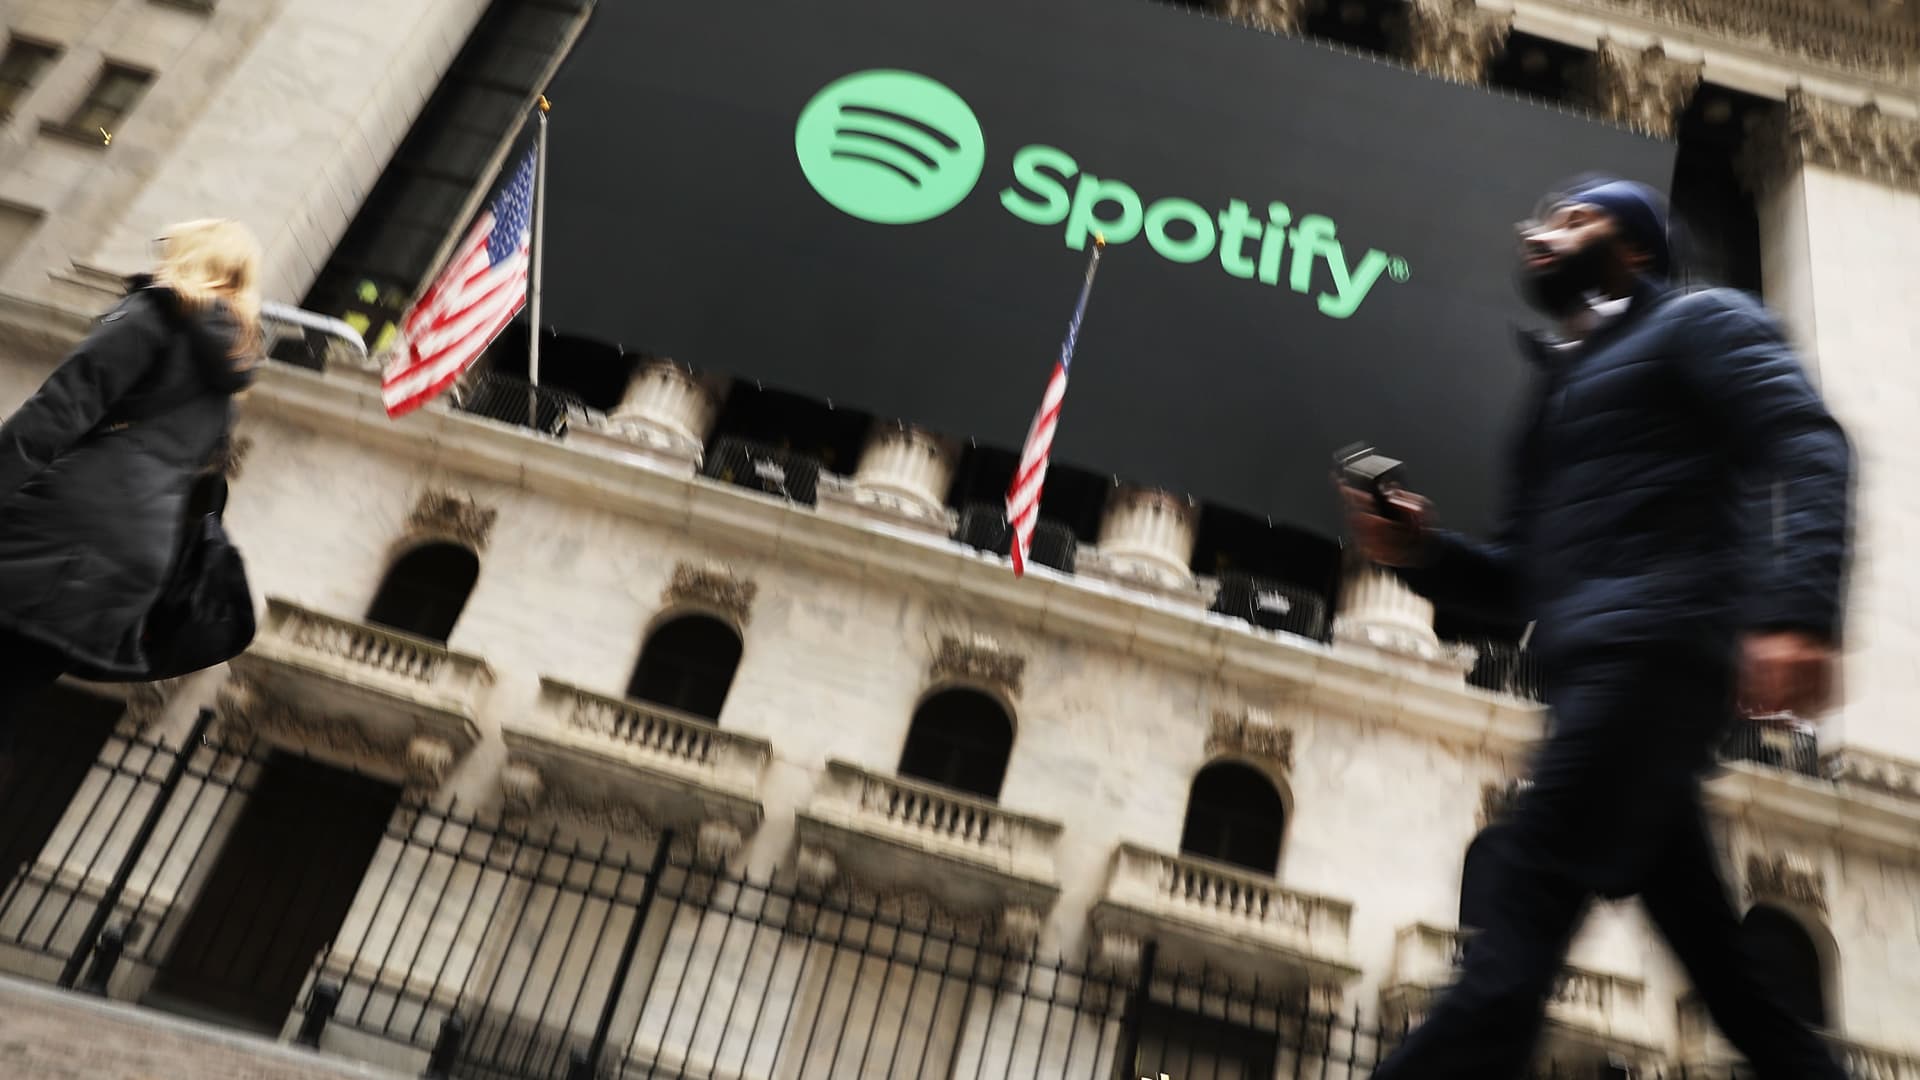 Buy Spotify as the music subscription service is in better shape than Netflix, Raymond James says